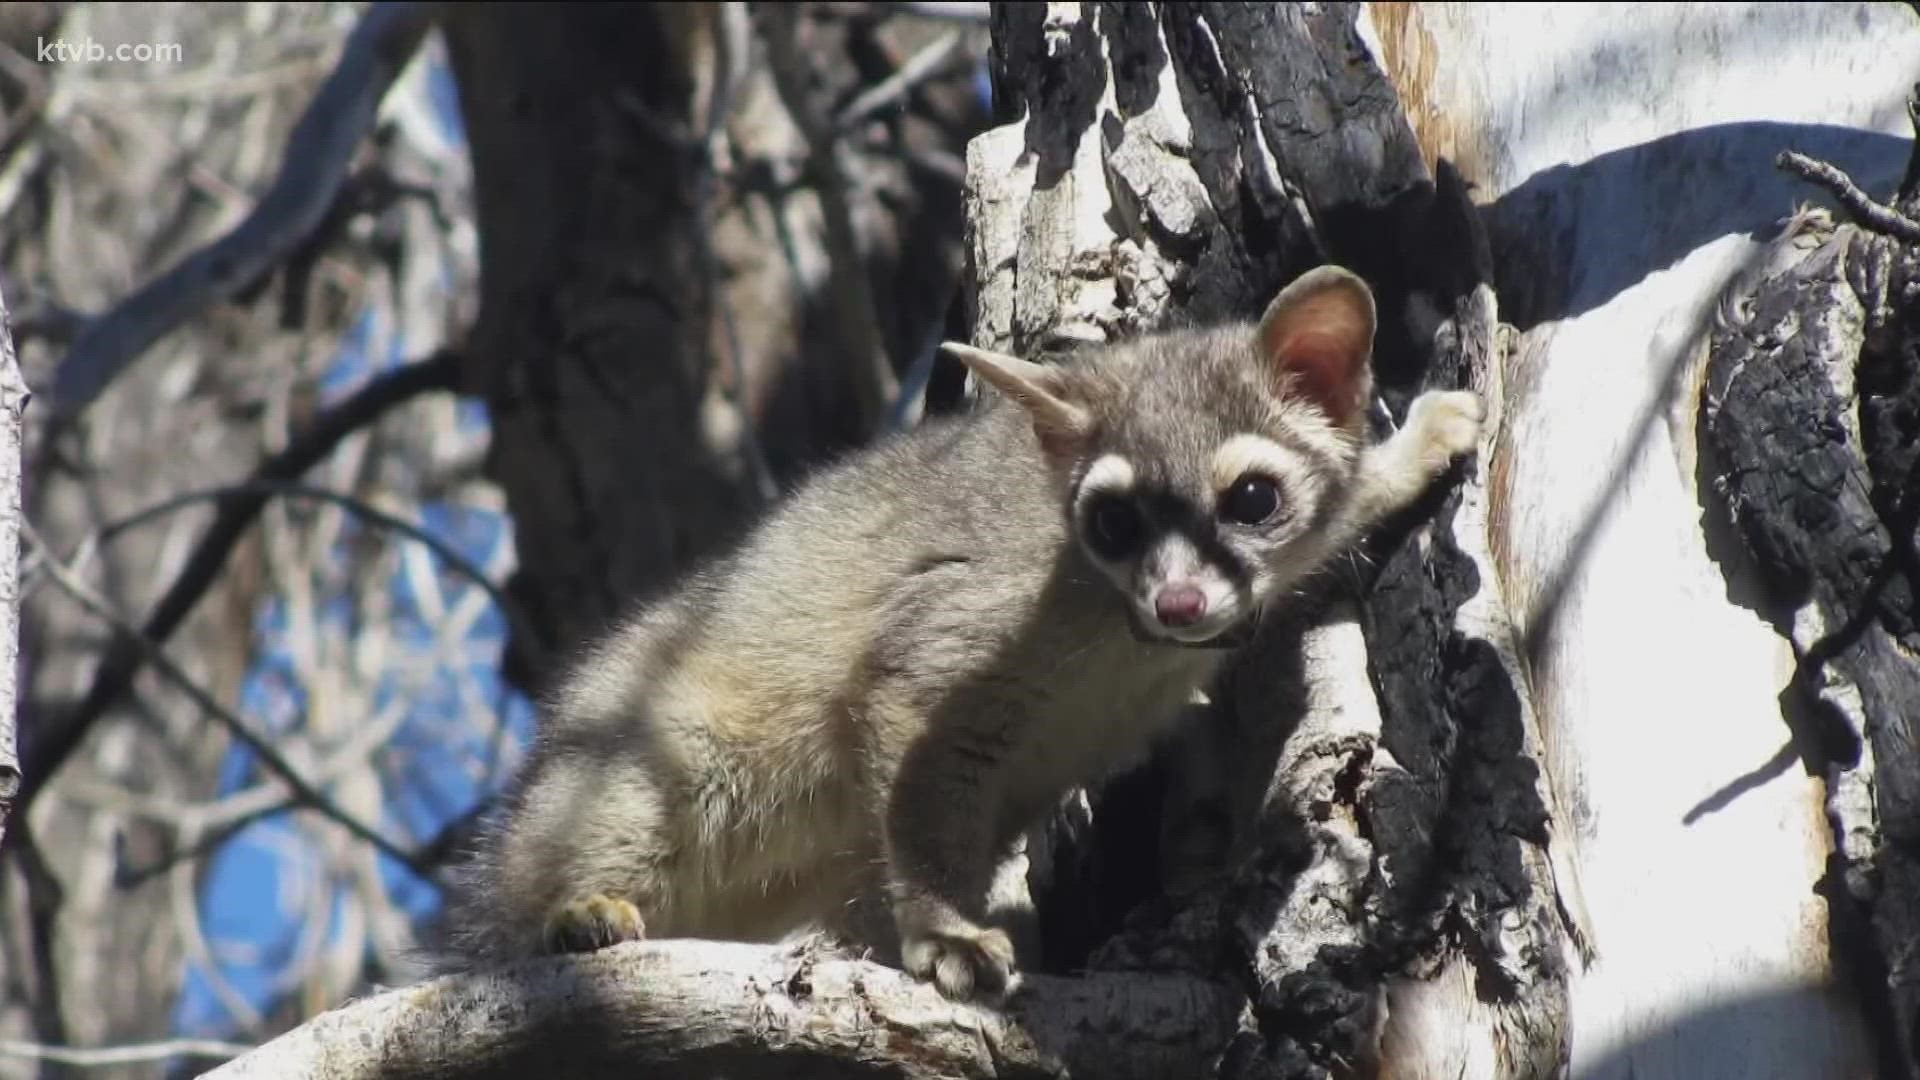 There have only been five confirmed sightings of ringtails in Idaho.